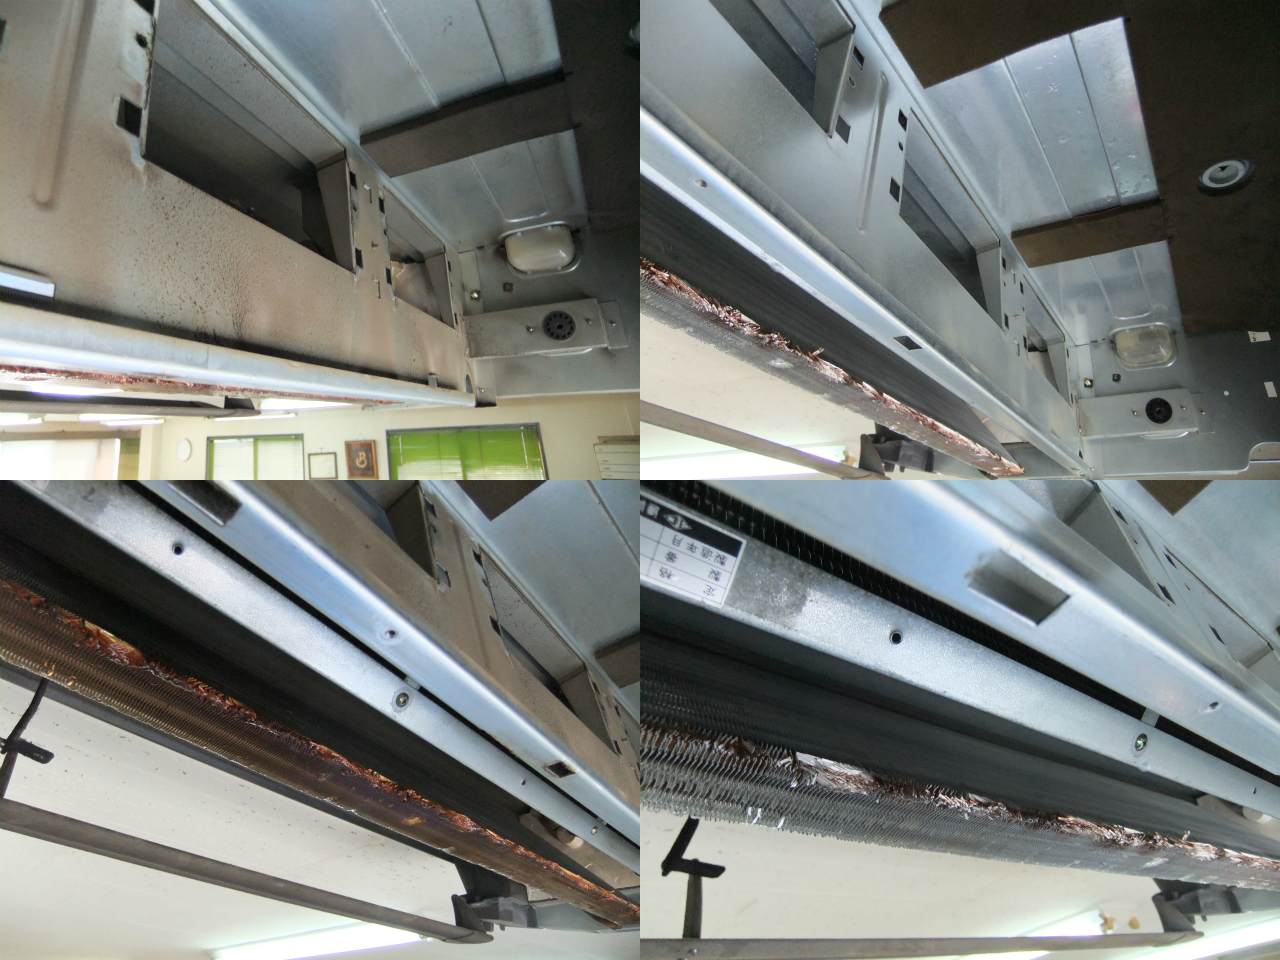 http://ajras.net/images/120822-aircon1.jpg